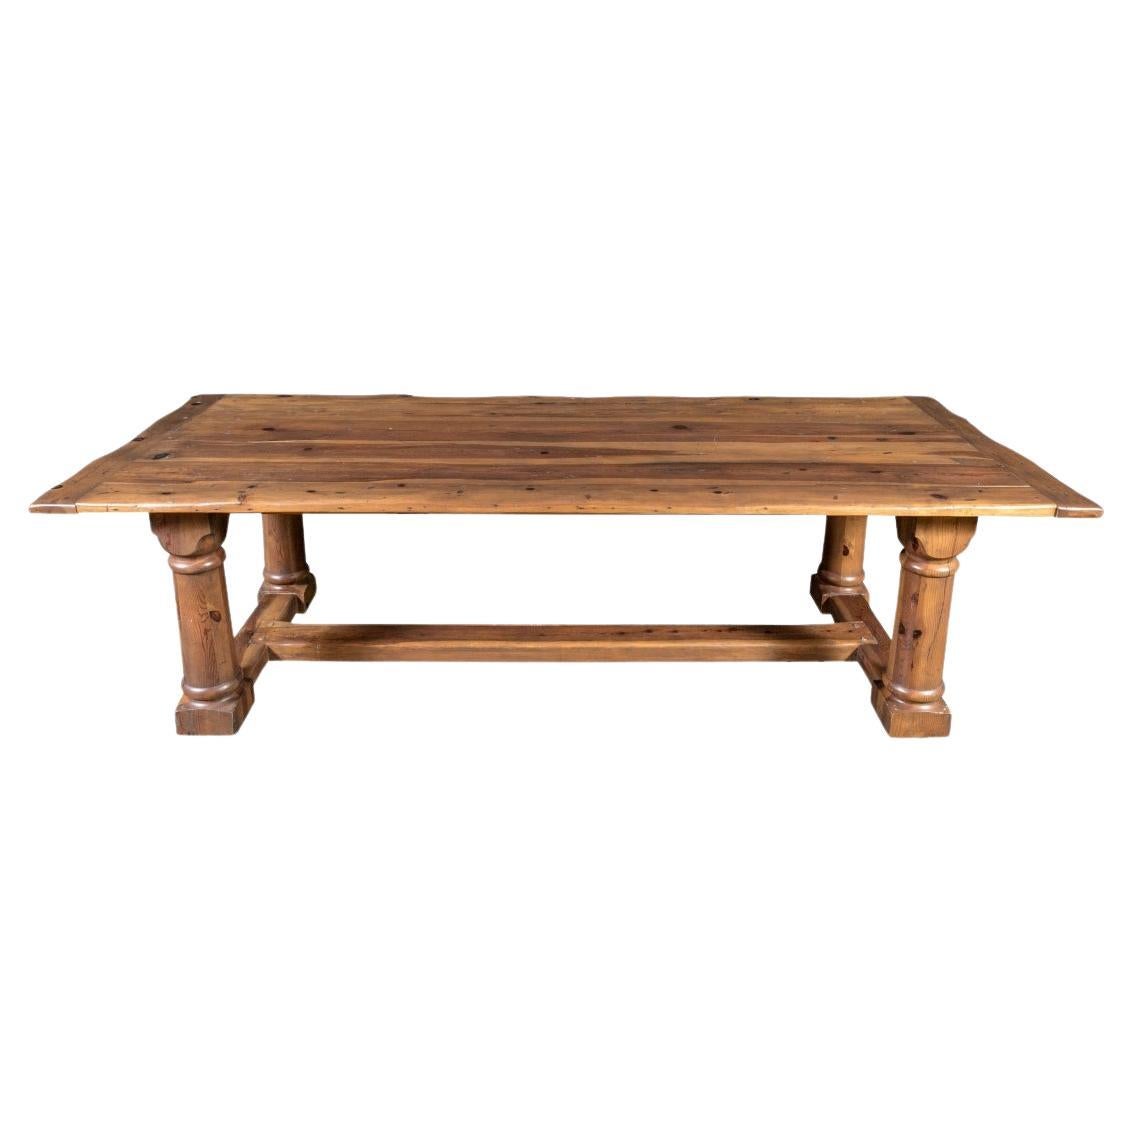 What type of dining table is the most durable?